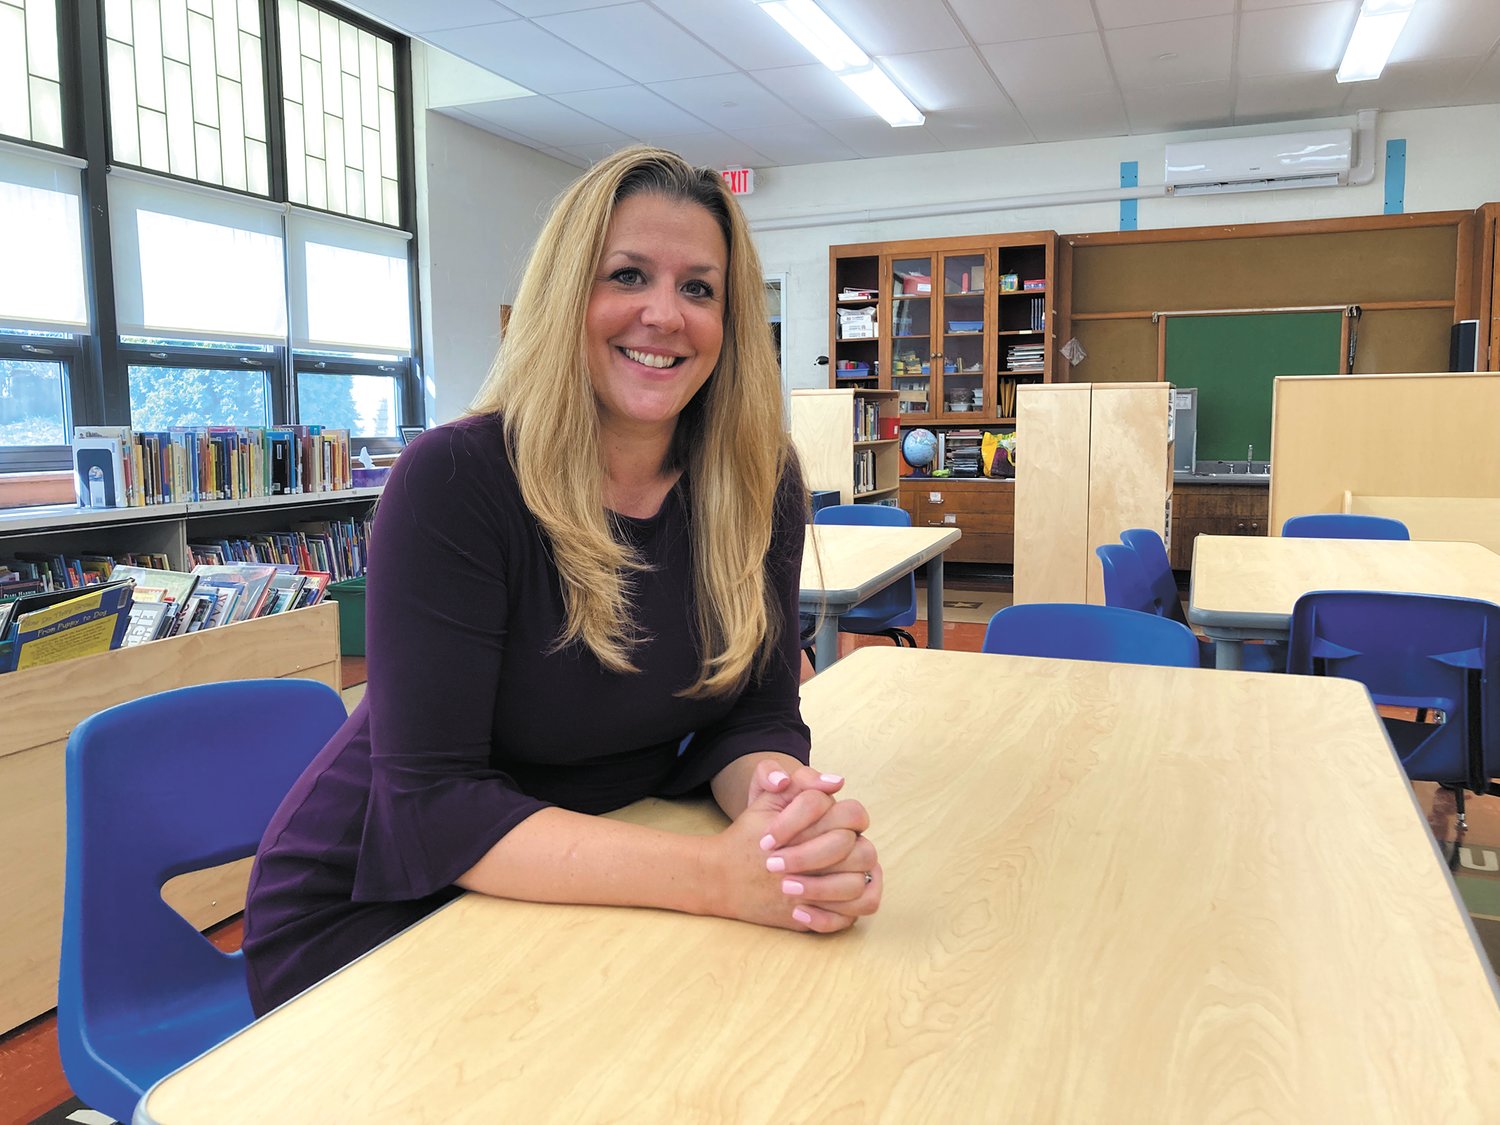 A MULTI-PURPOSE SPACE FOR LEARNING: Woodridge Elementary Principal Marisa Jackson came up with creating a 21st century multi-purpose, multimedia library space during the spring of 2020. Since then, she has worked with former librarian Ellen Basso and current librarian Deanna Brooks on making this a reality. (Herald photo)